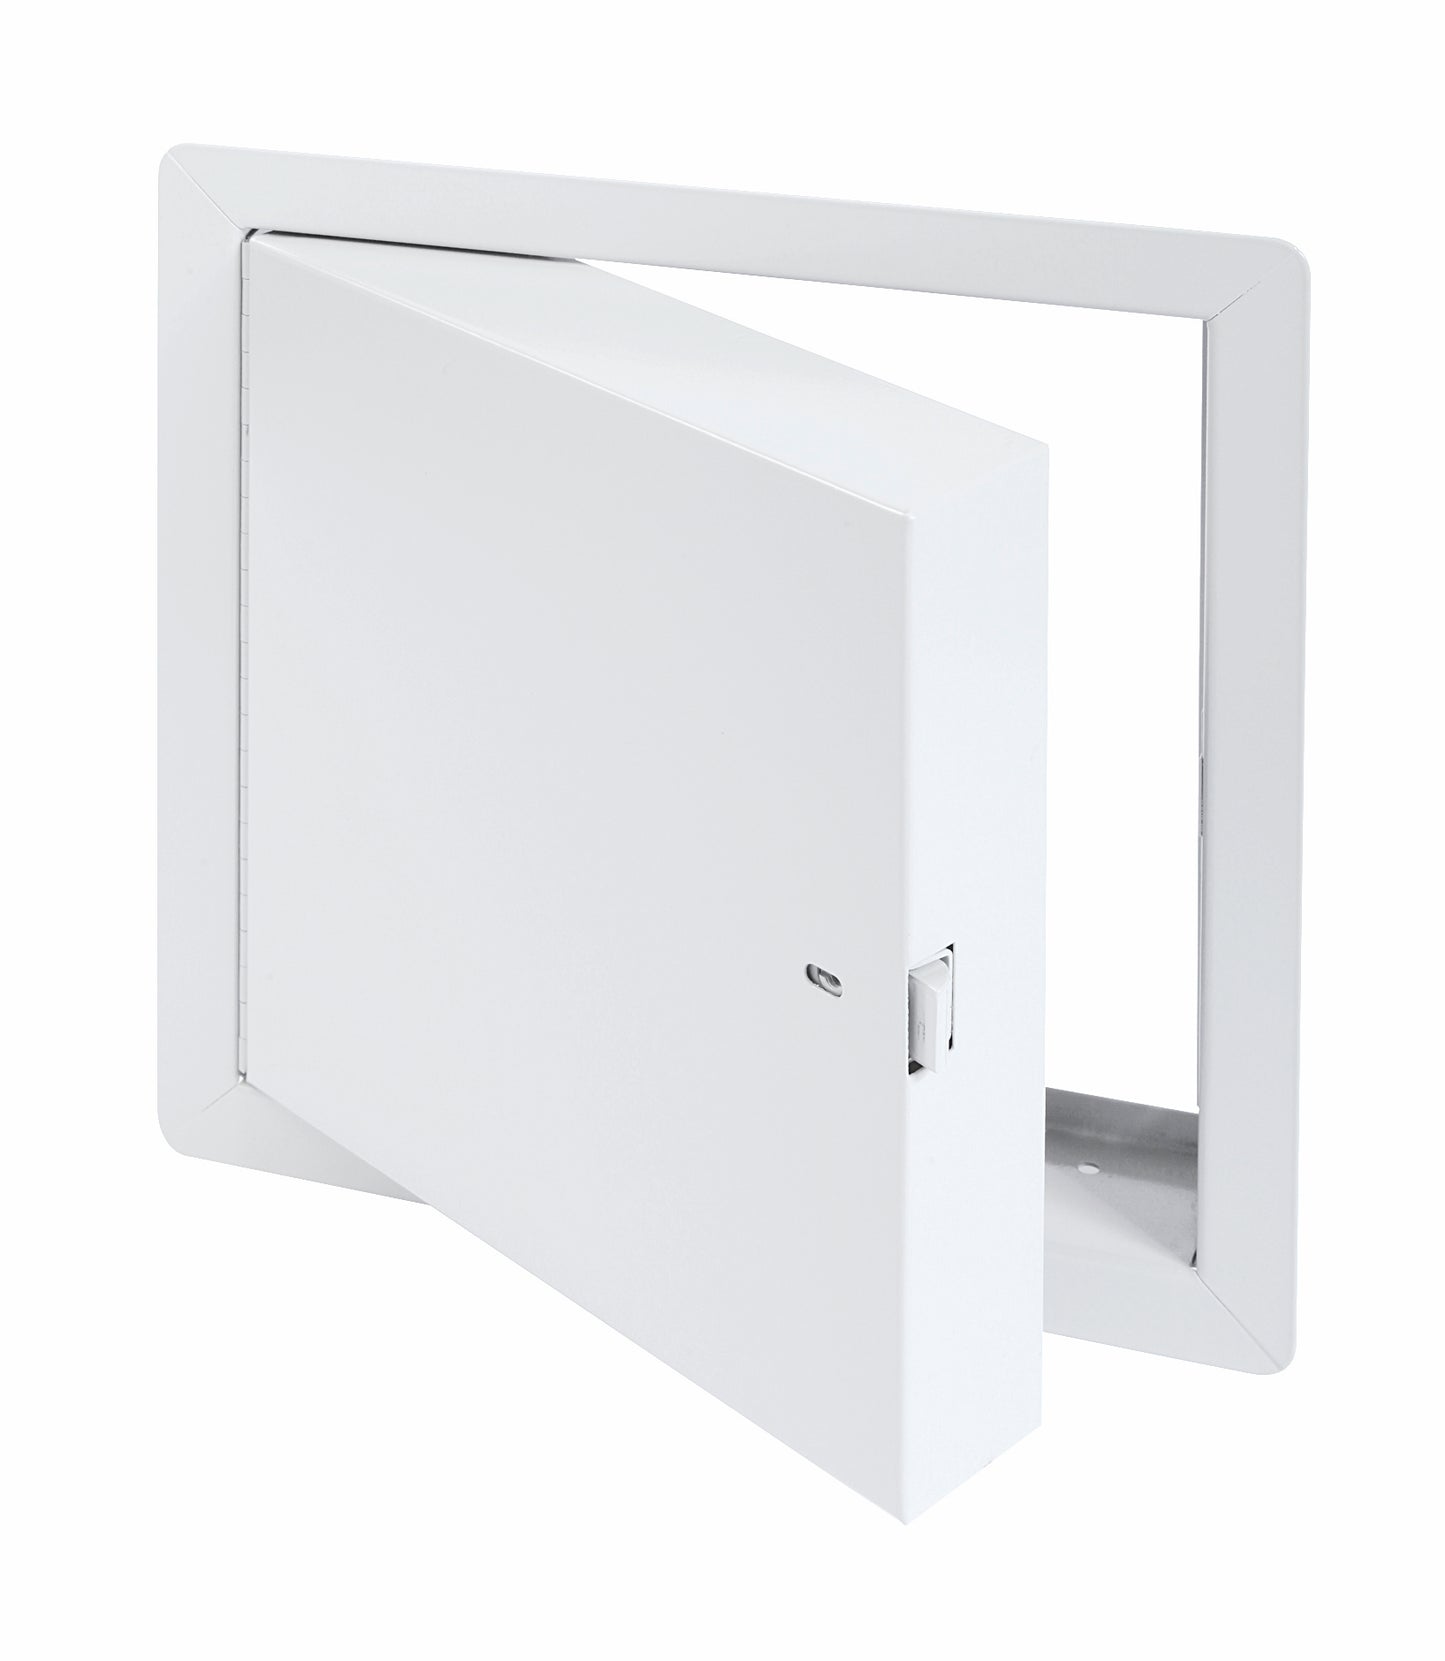 24"x24" Fire-rated Uninsulated Access Door with Drywall Flange, Cendrex